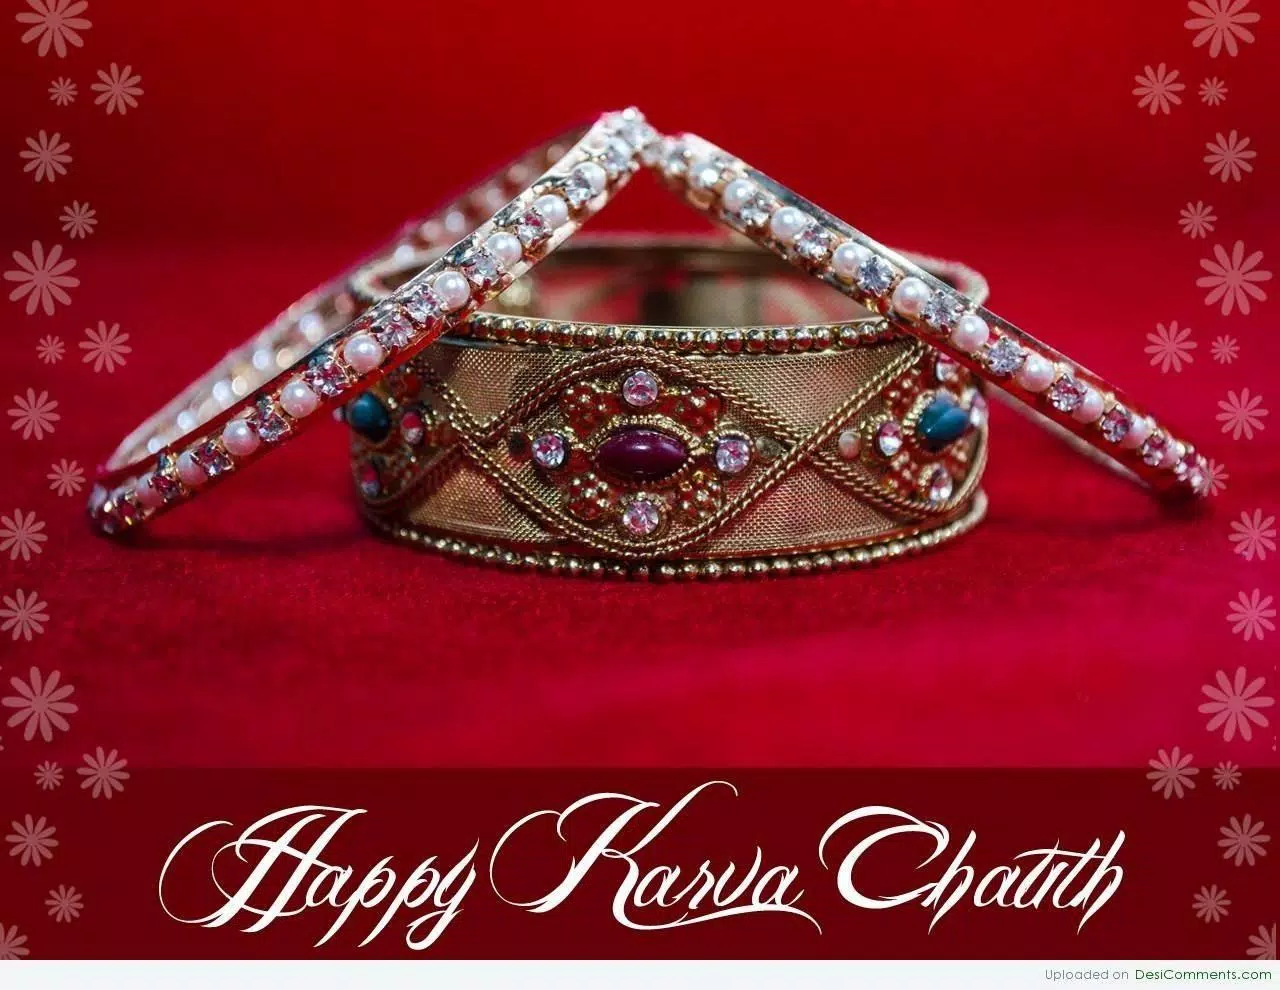 Karva chauth images apk for android download